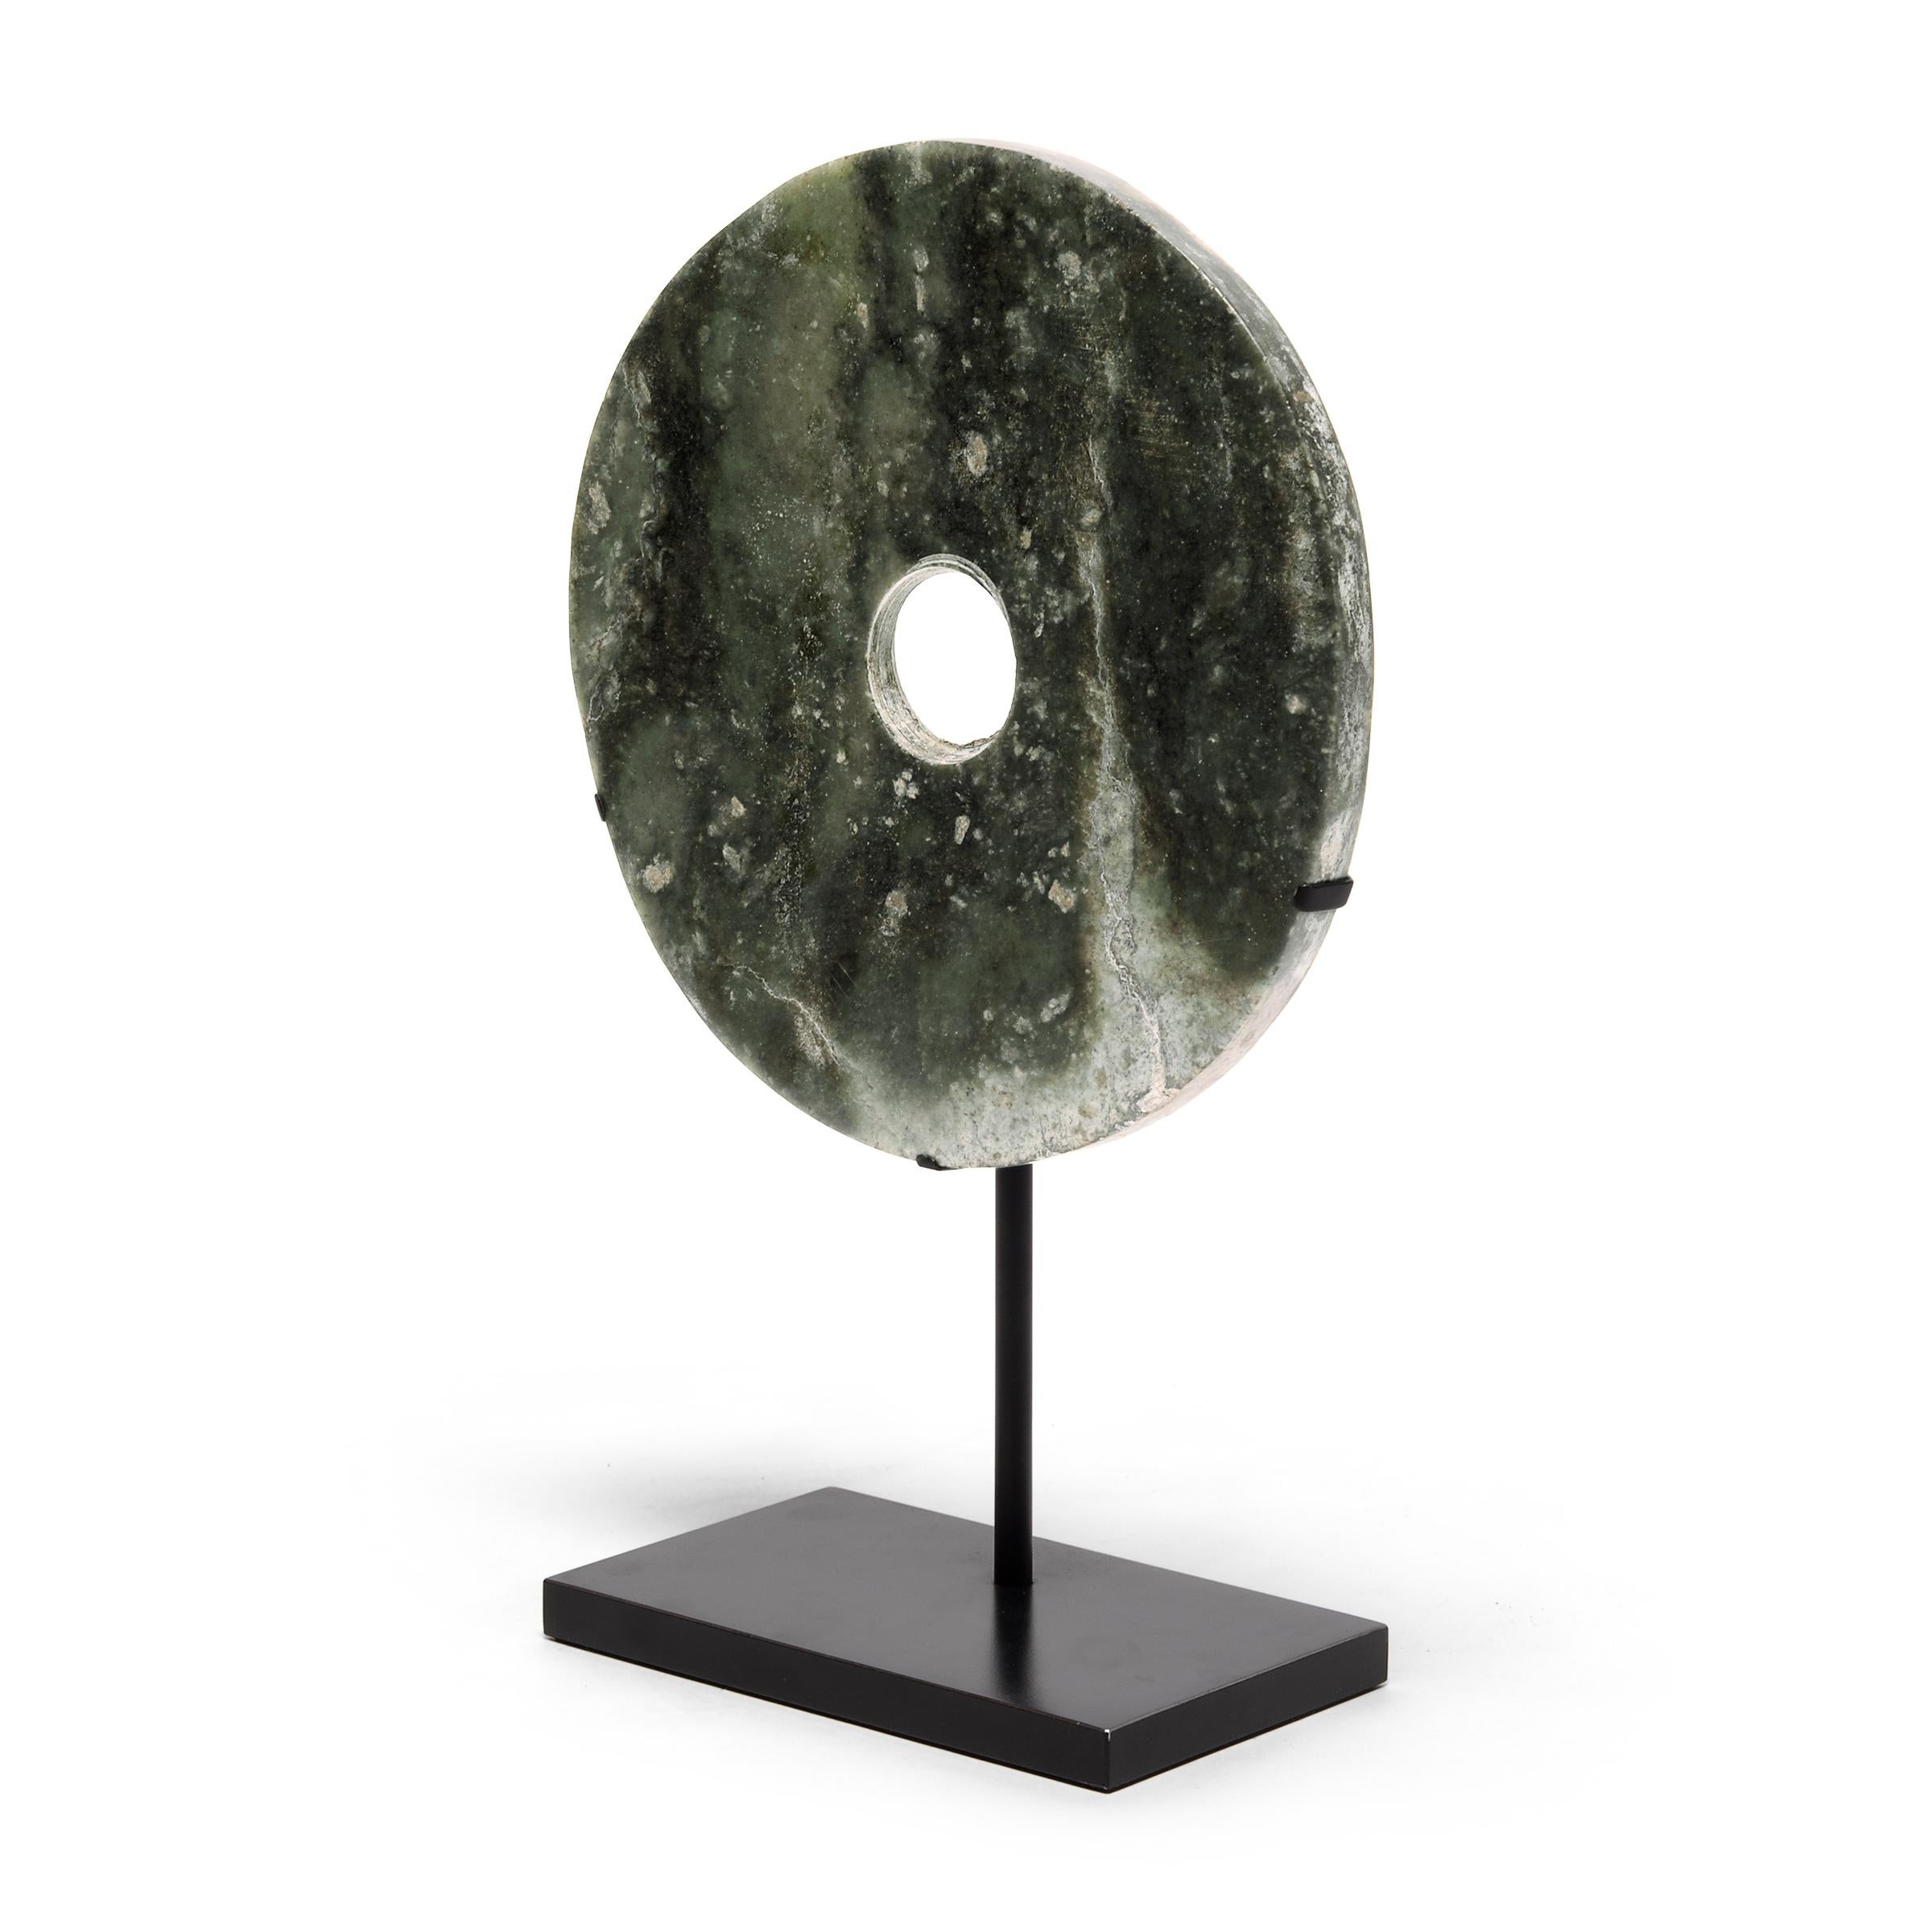 Found in the tombs of ancient Chinese emperors and aristocrats, bi discs such as this have a mysterious and spiritual history, and their function and significance remain uncertain. Shaping this hard stone takes considerable skill. An artisan